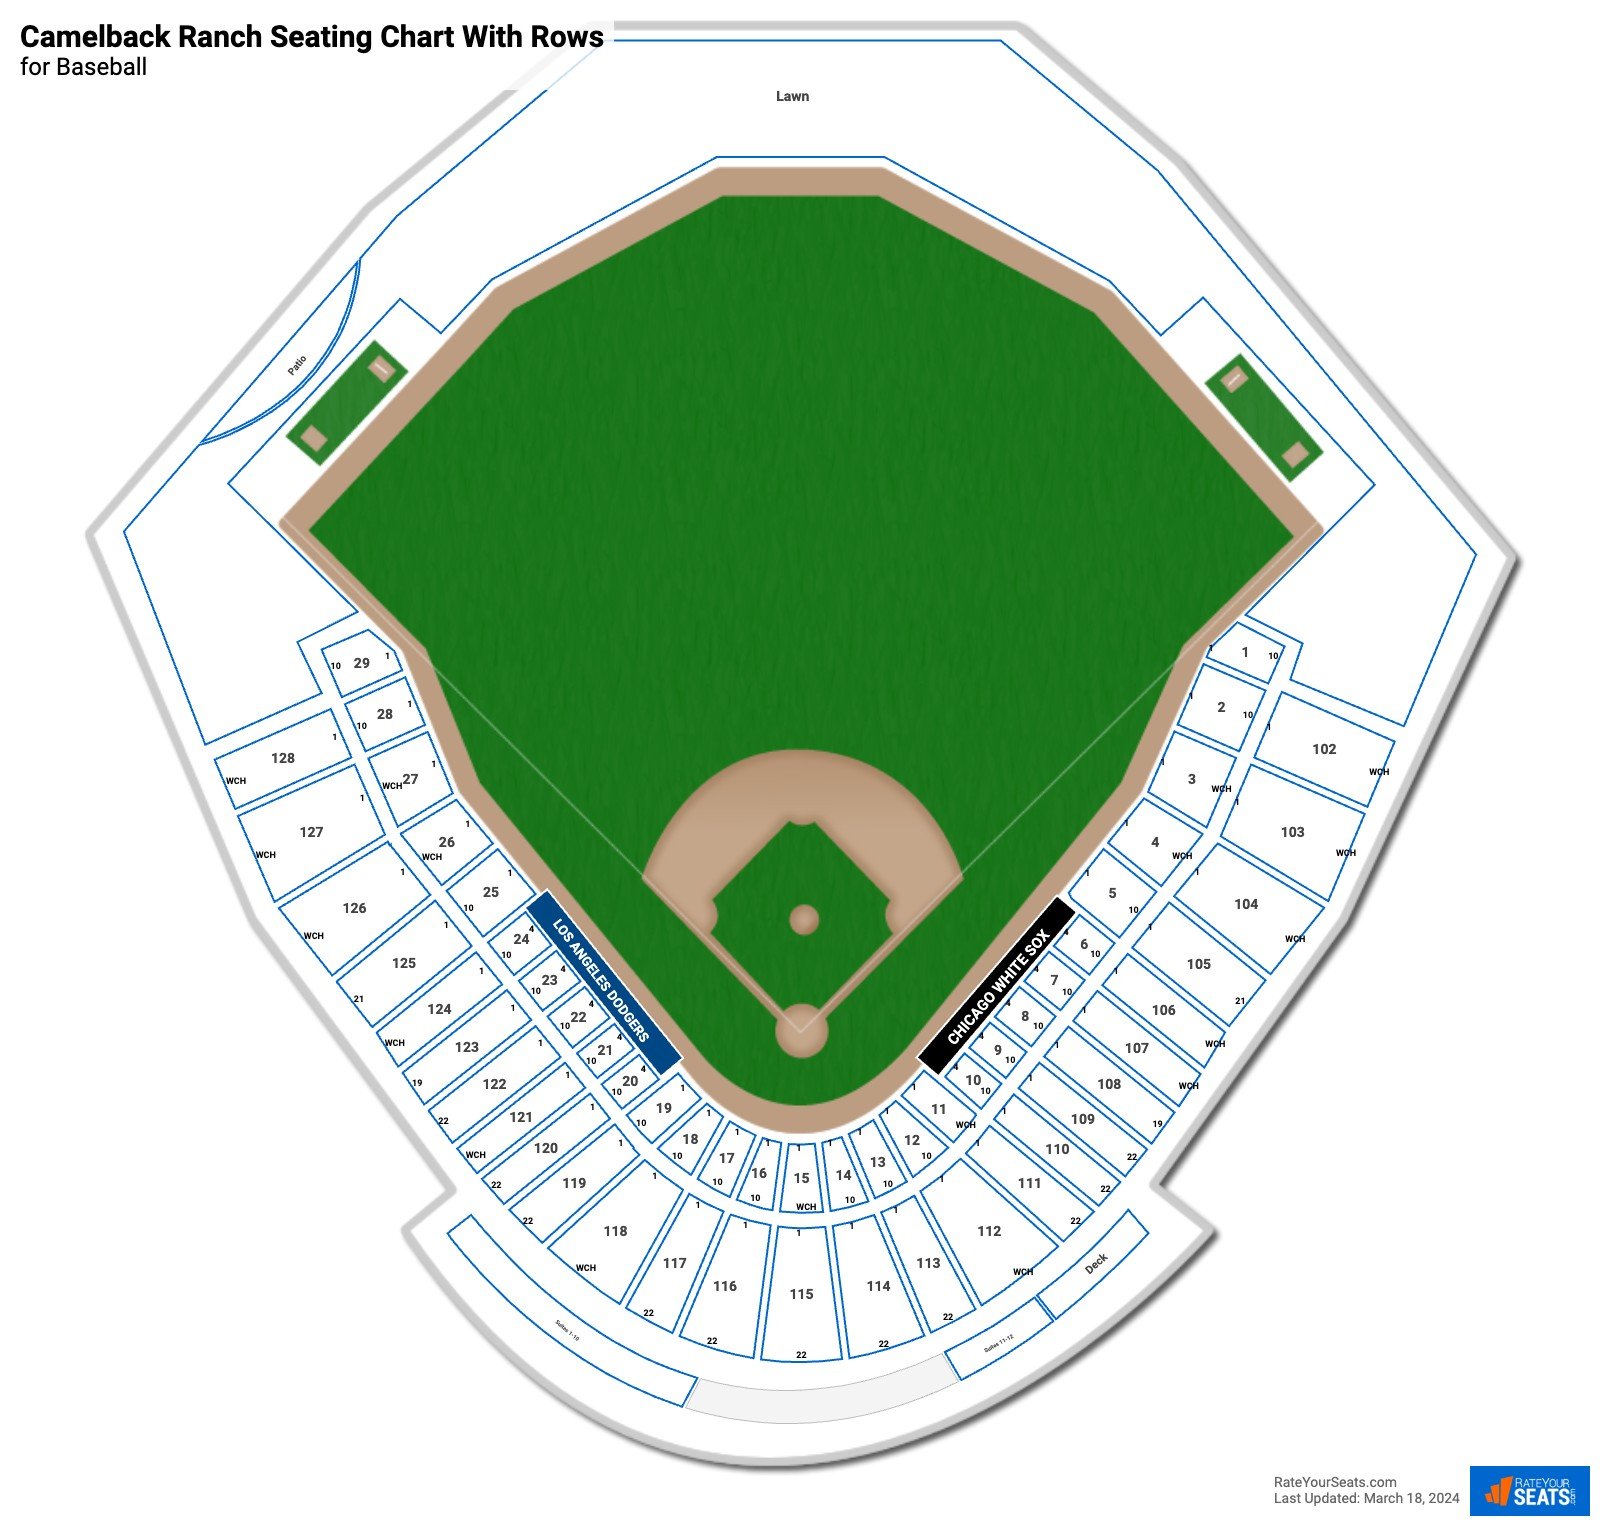 Camelback Ranch seating chart with row numbers